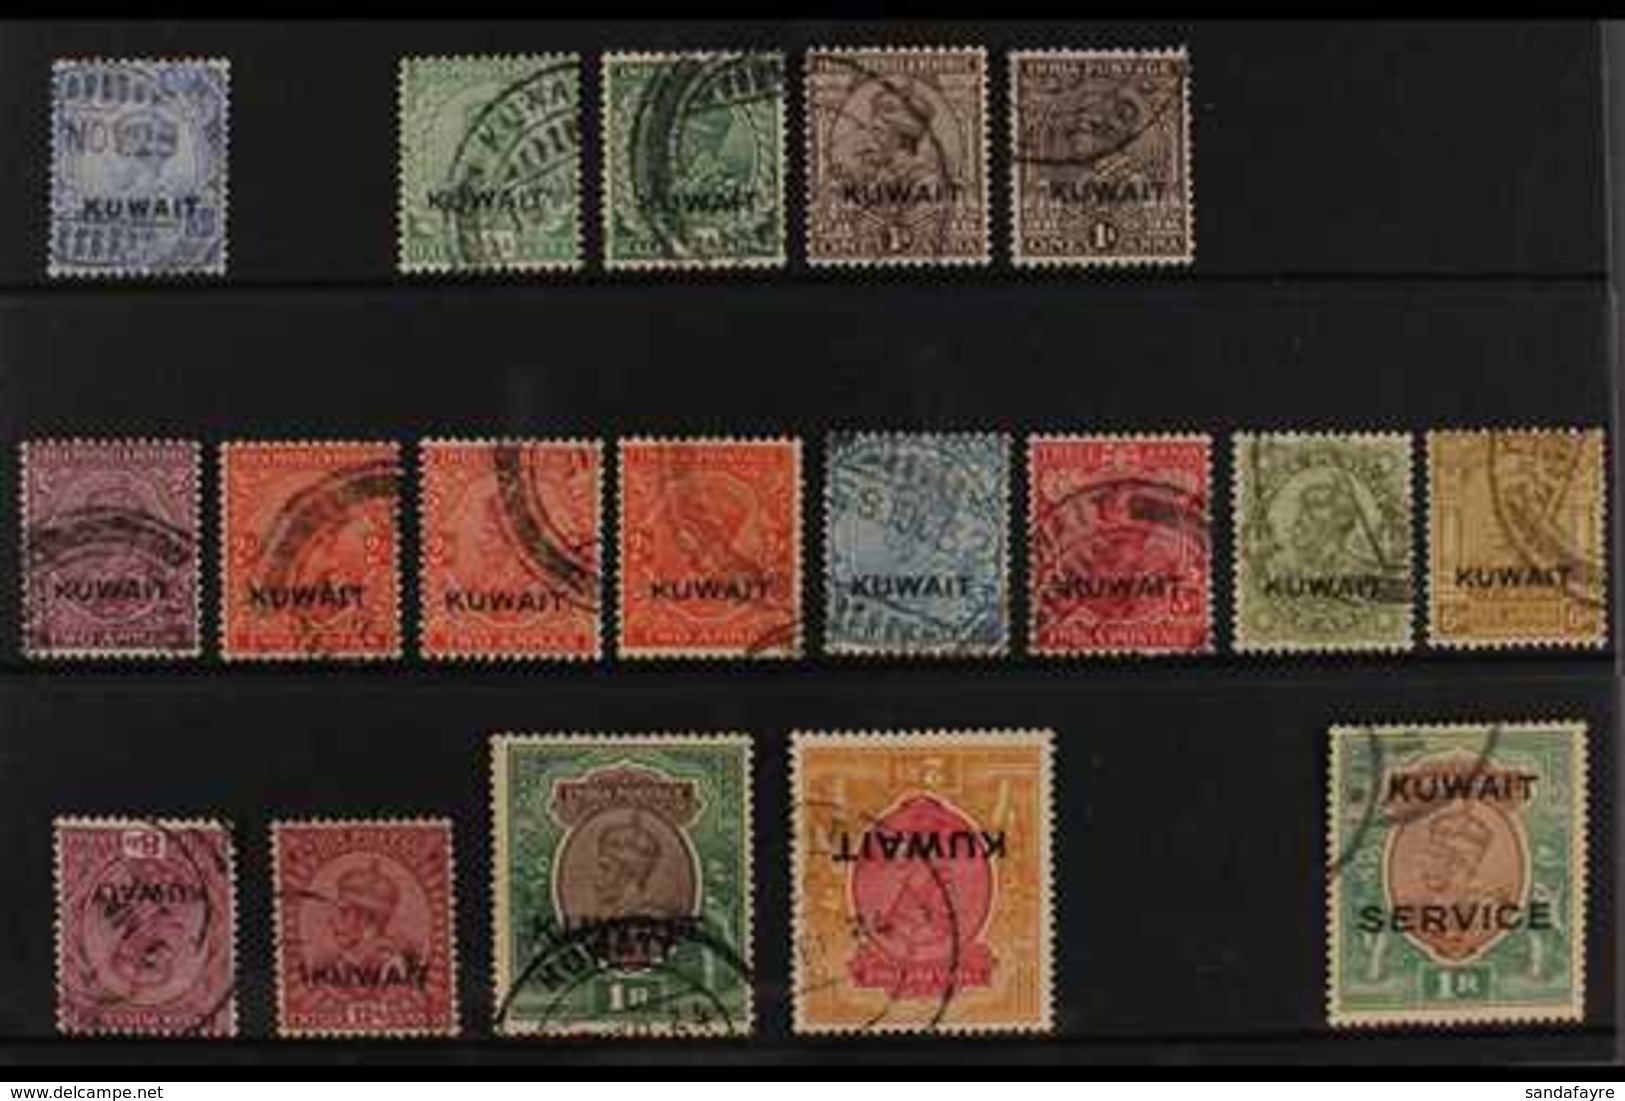 1923-1937 KGV USED COLLECTION Presented On A Stock Card That Includes 1923-23 Star Wmk 3a, 1929-37 Multi Star Wmk Set To - Kuwait